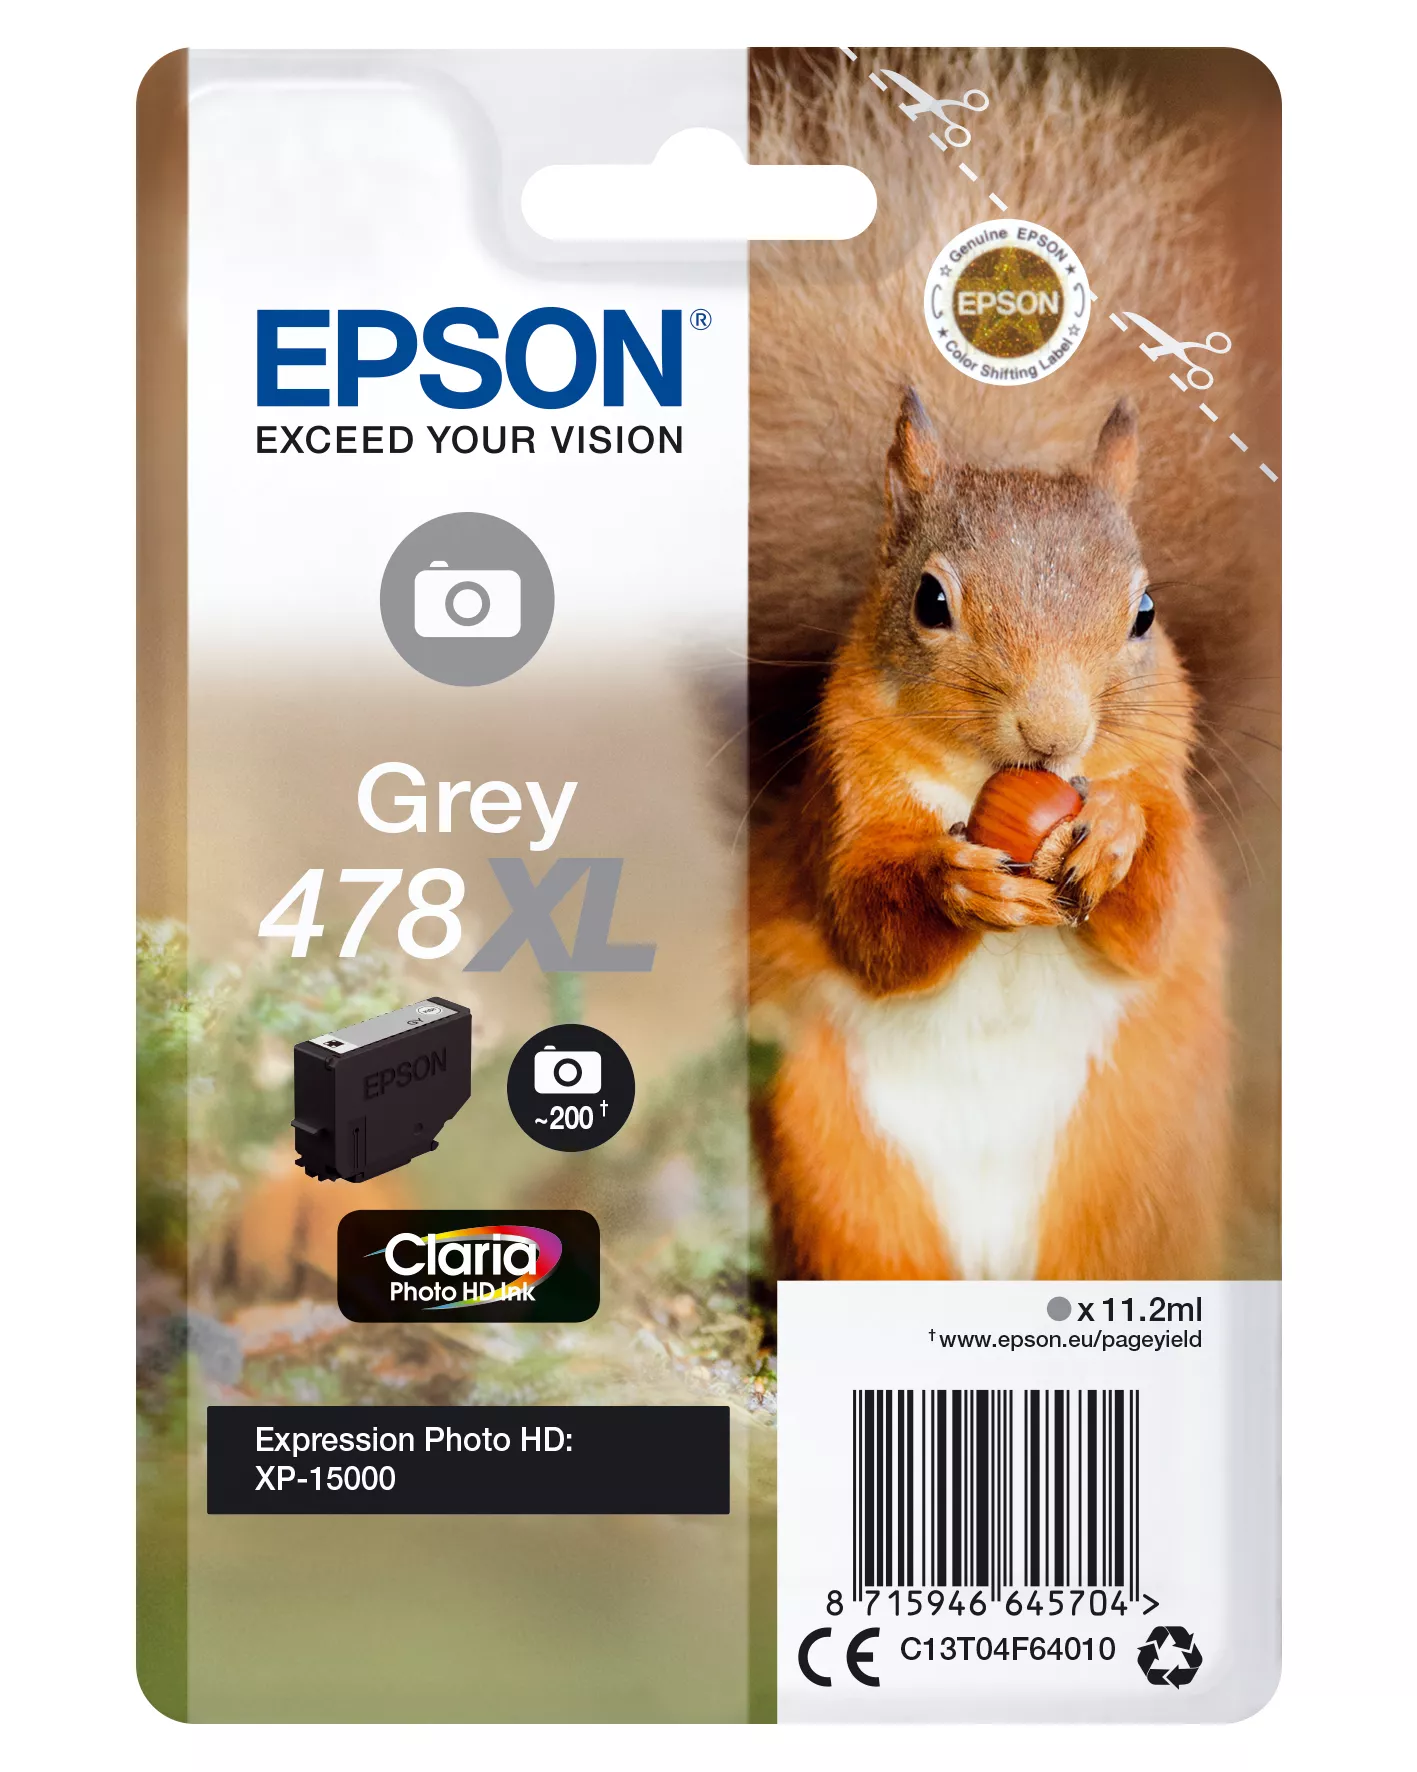 Achat Cartouches d'encre Epson Squirrel Singlepack Grey 478XL Claria Photo HD Ink